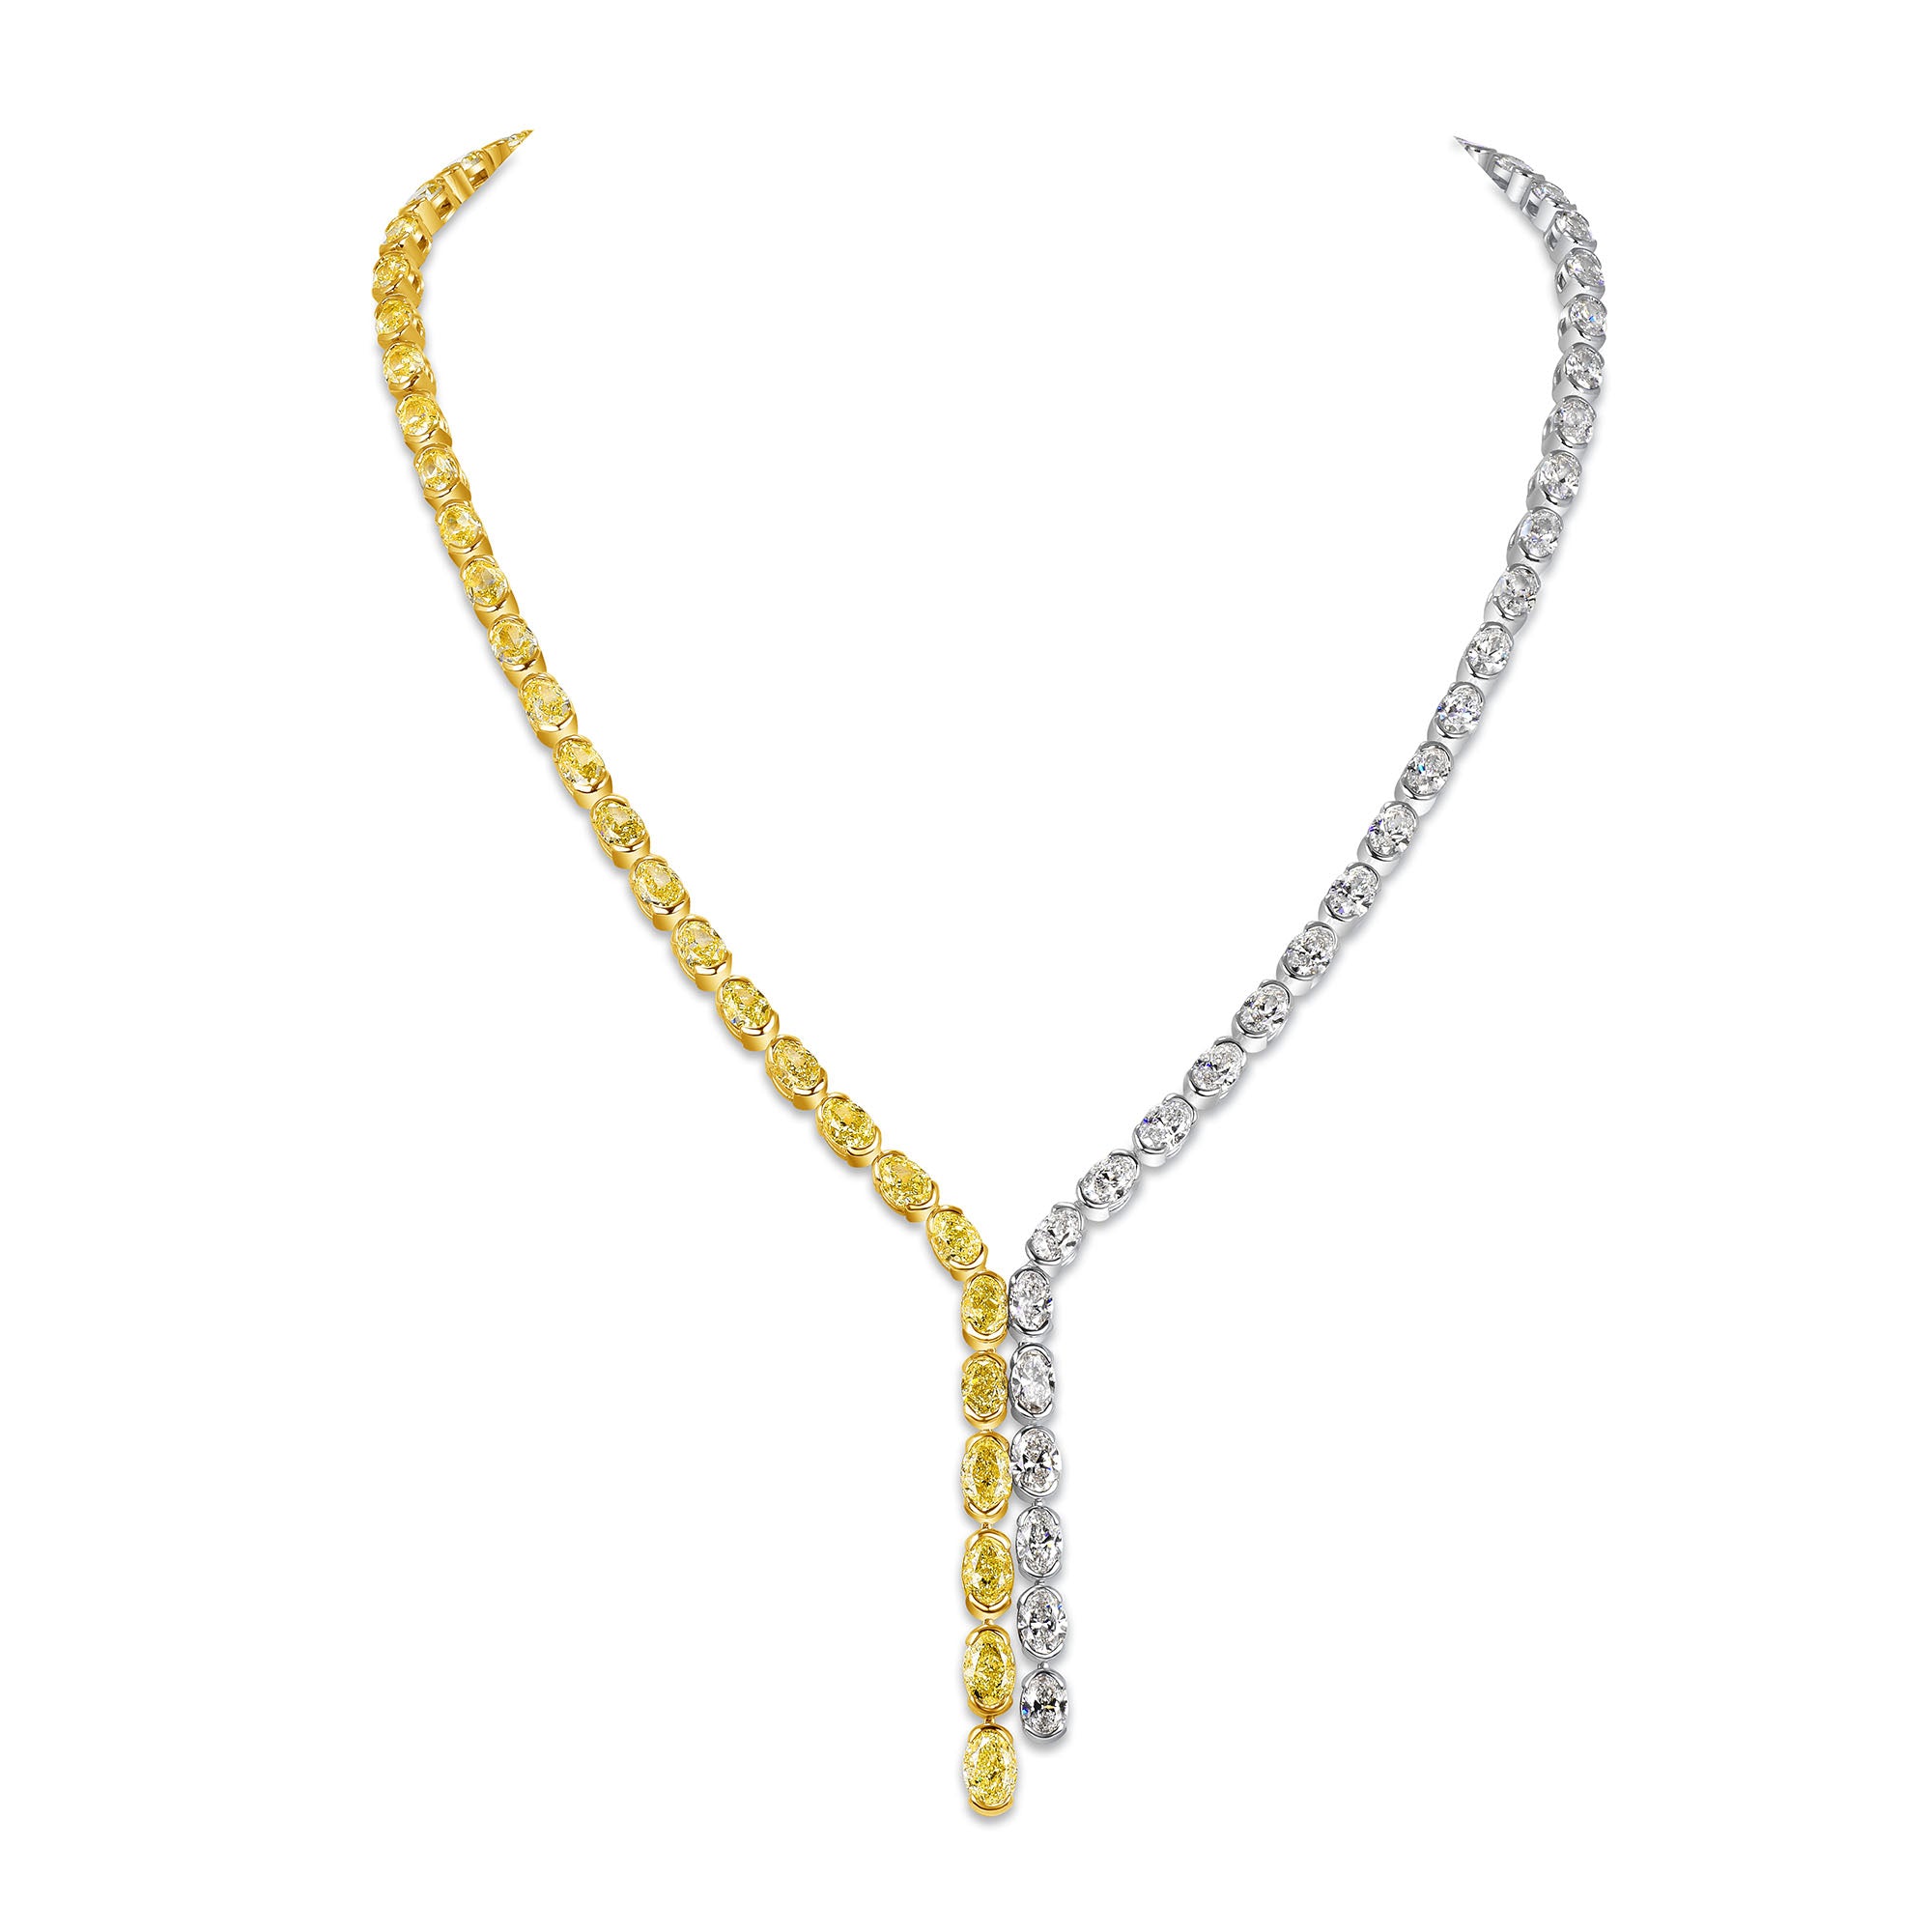 Oval Cut White and Yellow Diamond Lariat Necklace in 18 Karat White Gold and Yellow Gold